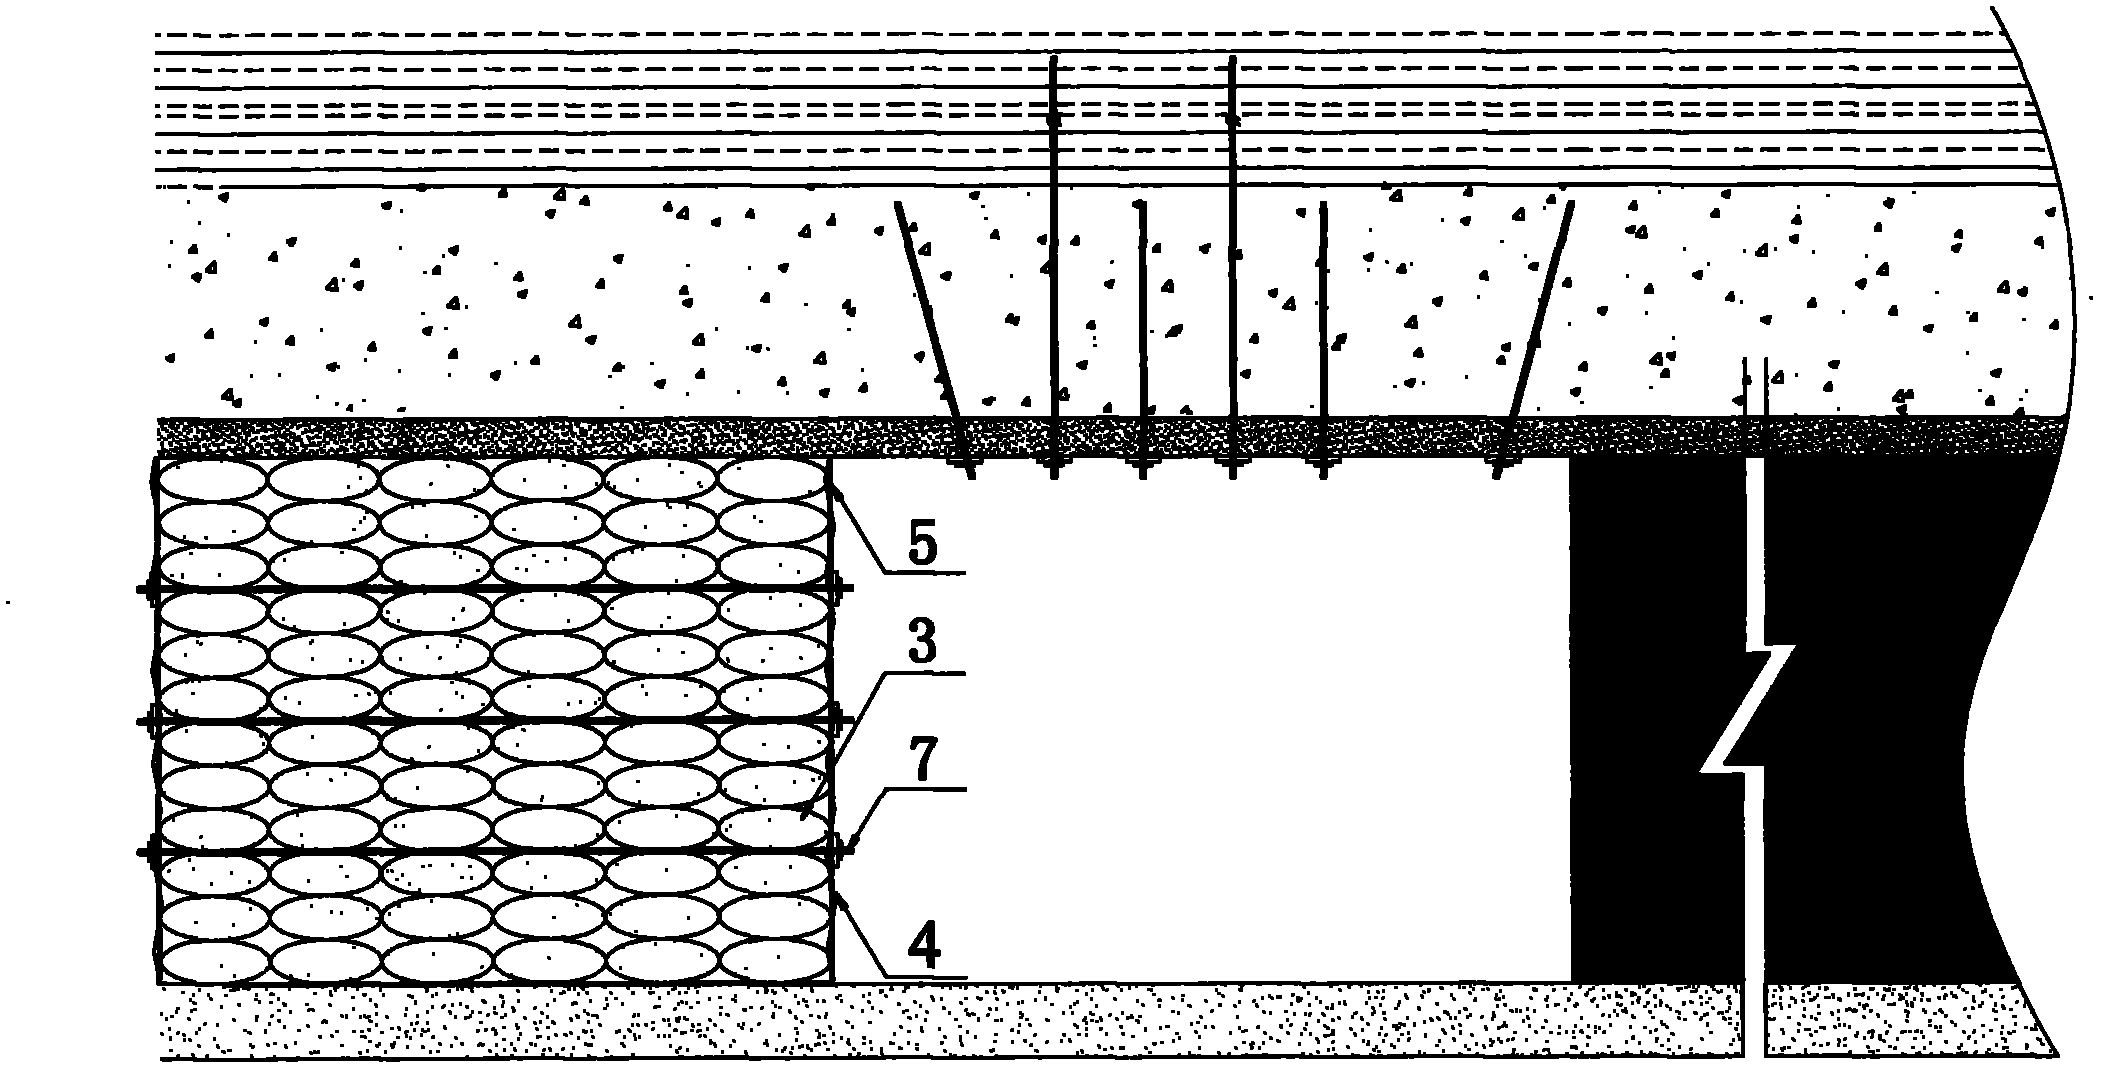 A method of retaining entry along the goaf with solid filling coal mining and building gangue walls